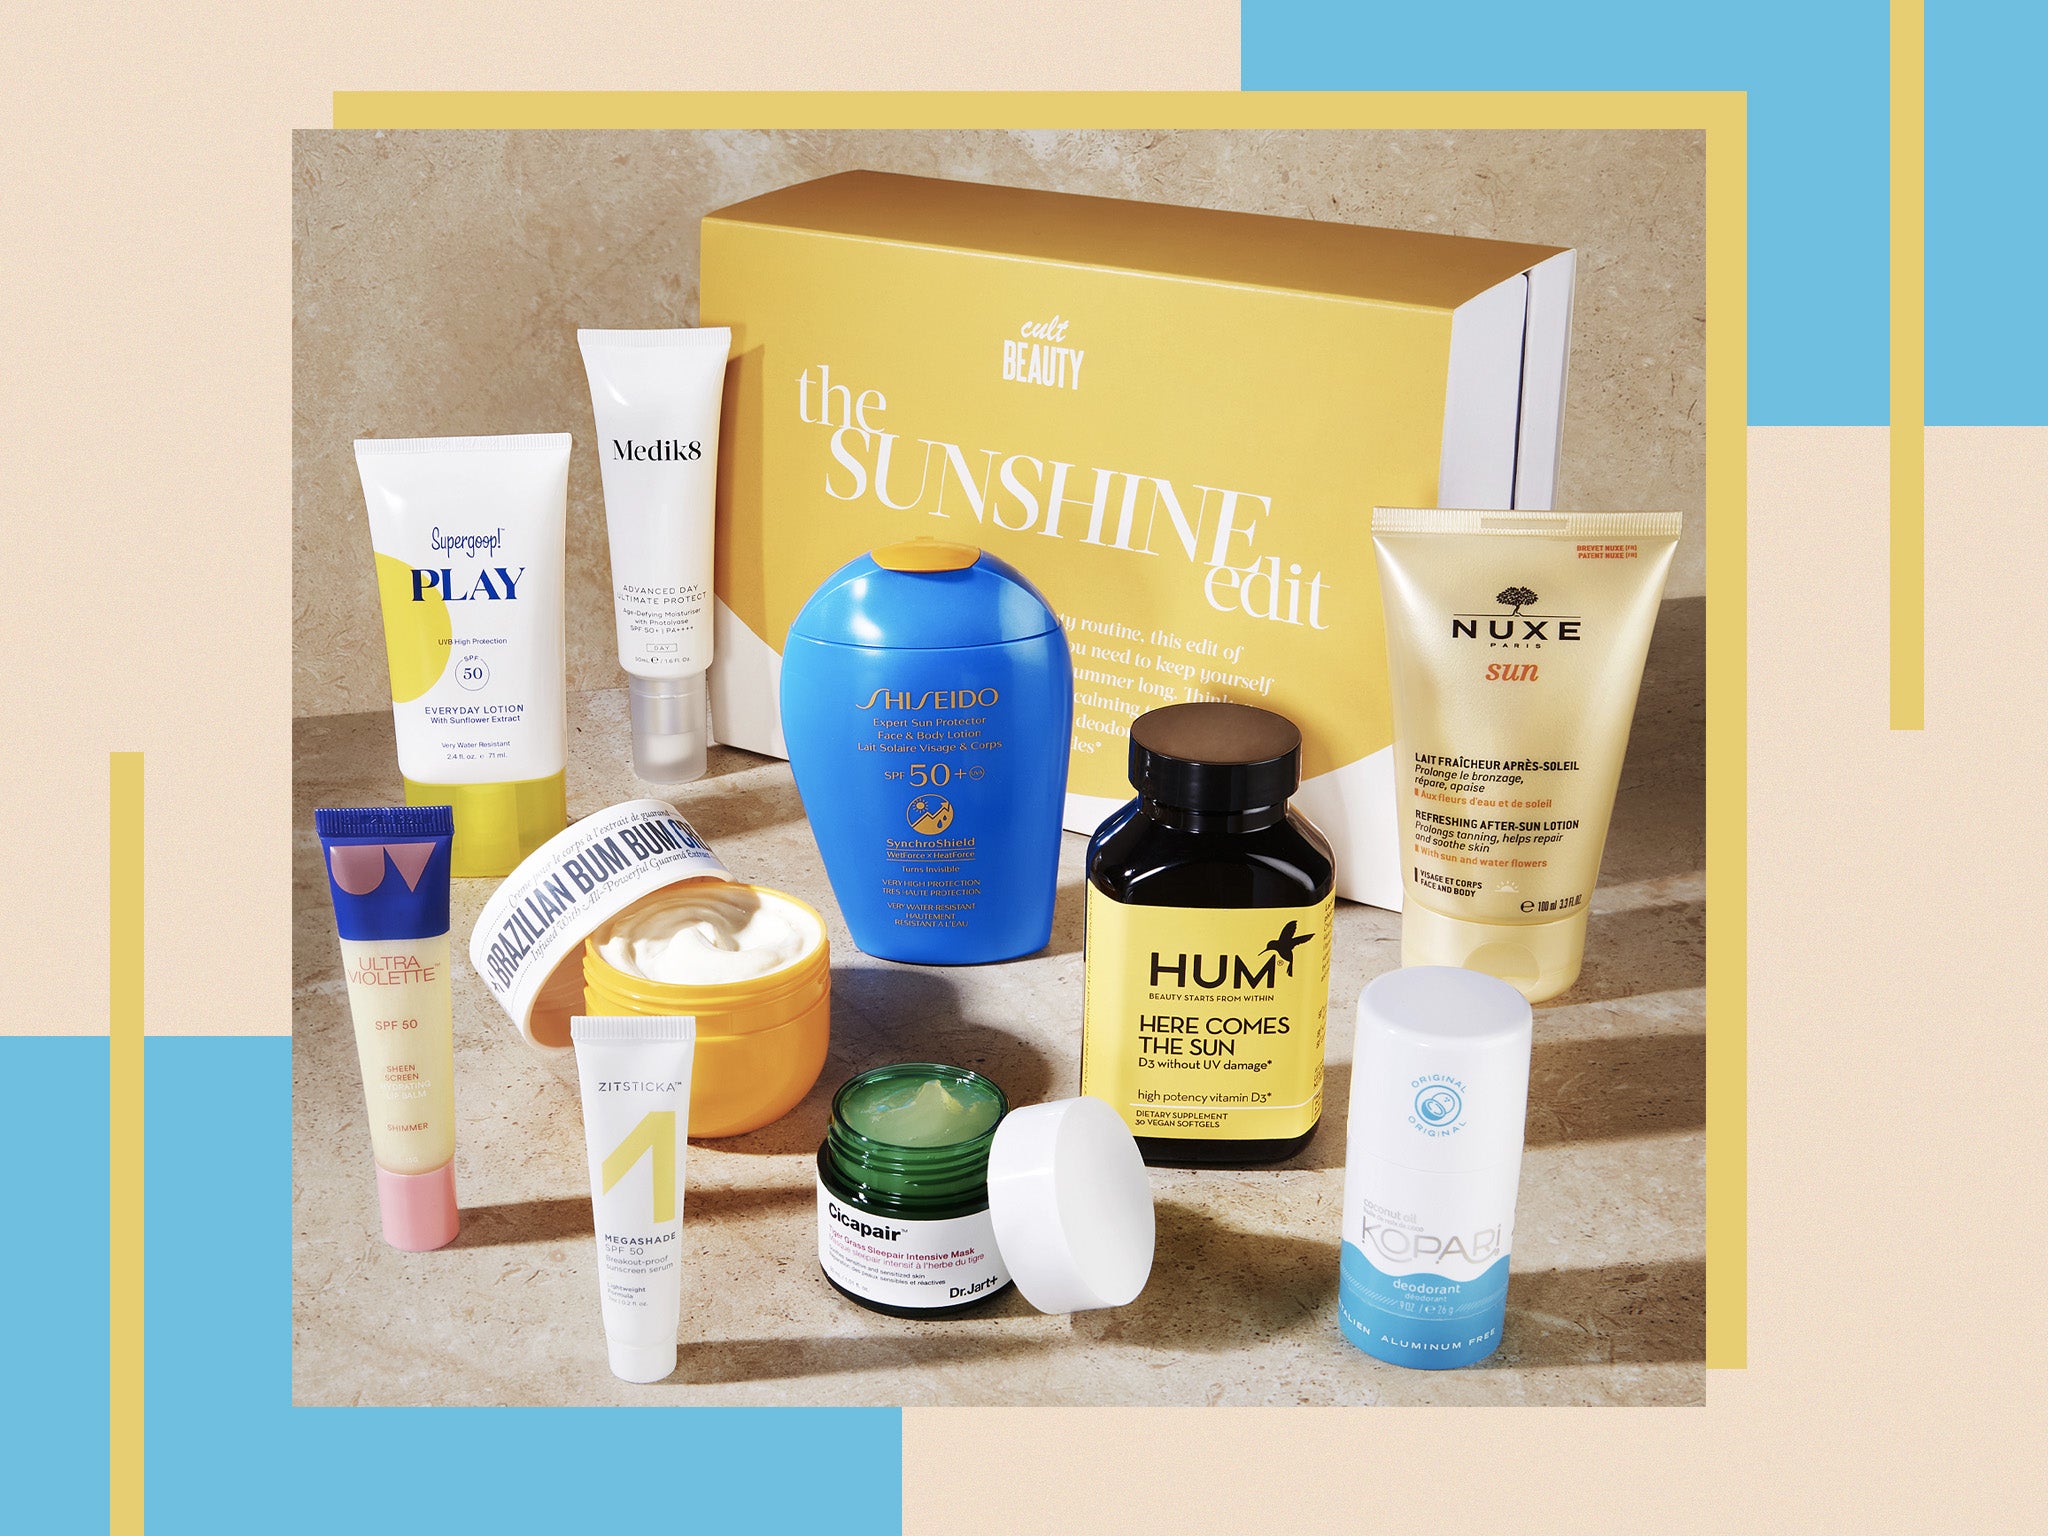 Cult Beauty's sunshine edit is packed with SPF essentials from